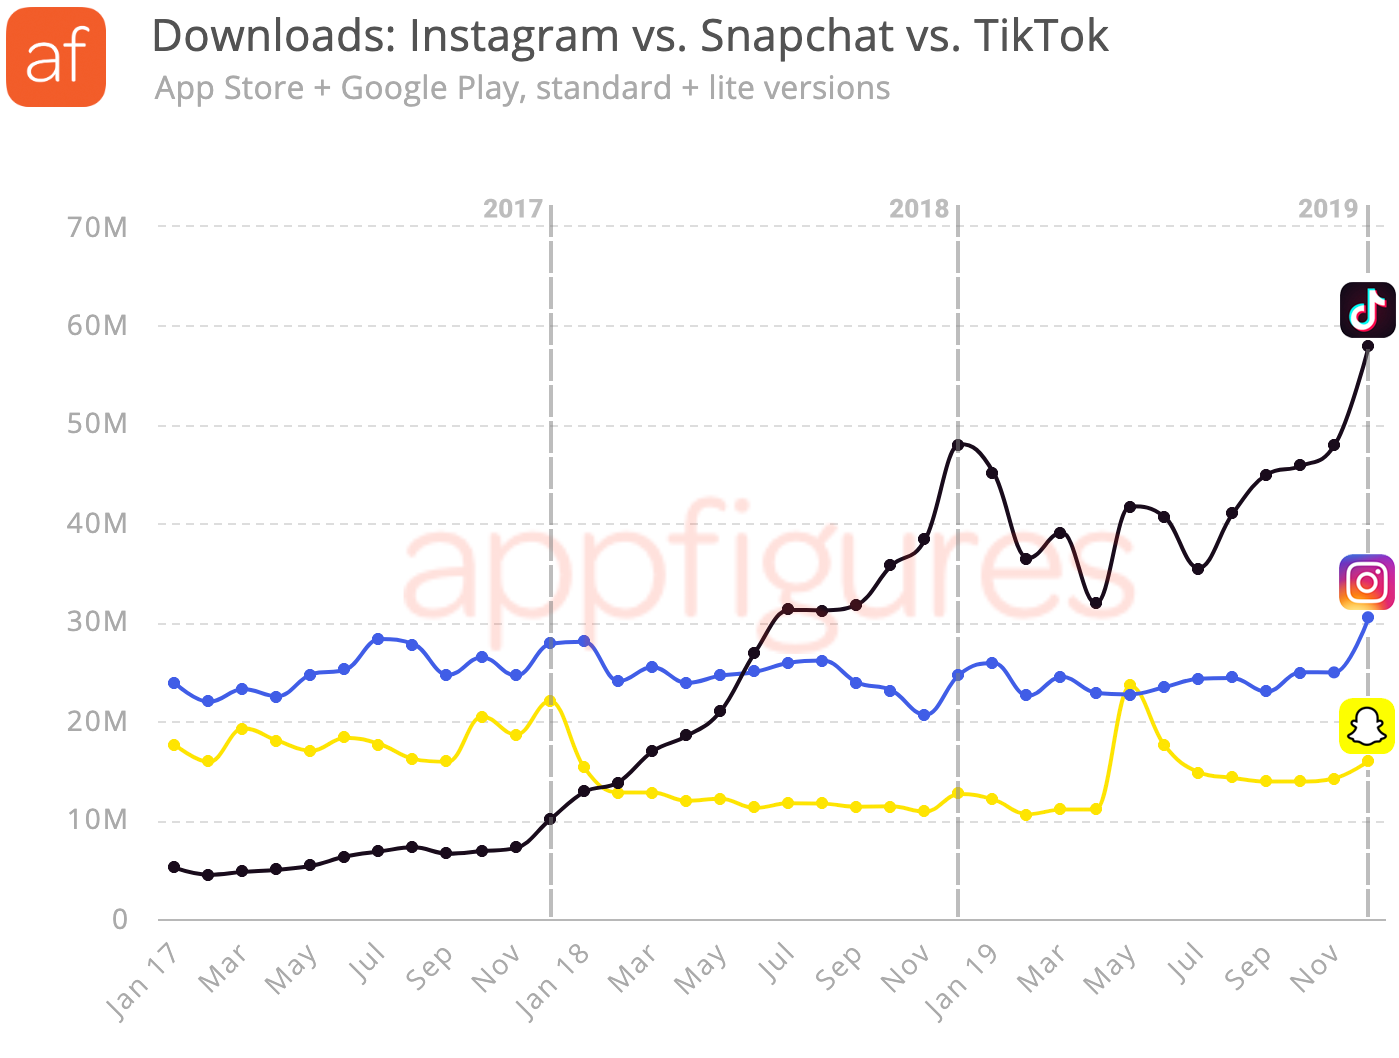 Estimated downloads for TikTok, Instagram, and Snapchat by Appfigures